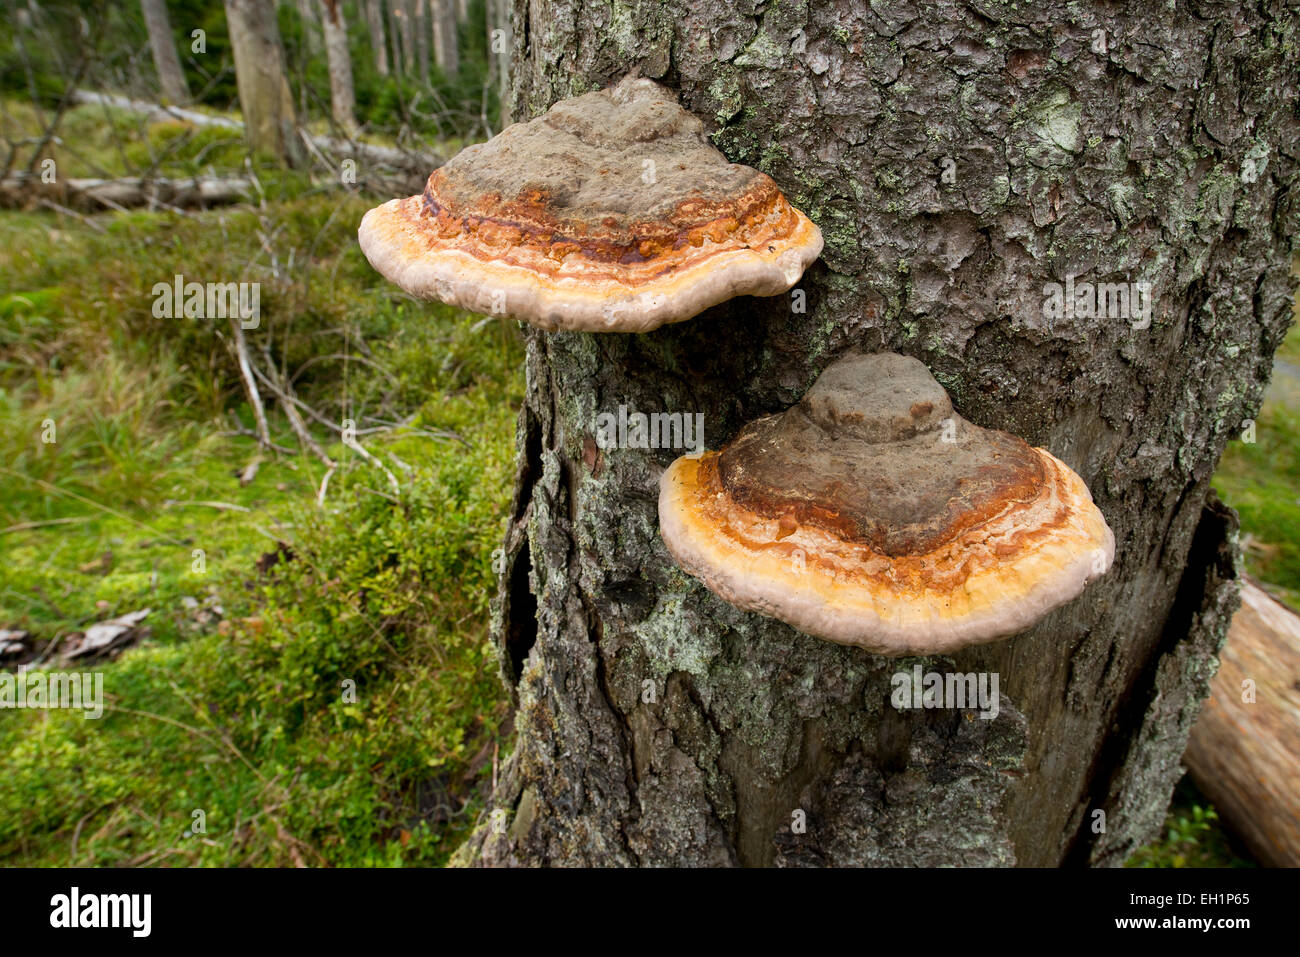 Red-belted Bracket or Red-Belt Conk (Fomitopsis pinicola), Harz National Park, Lower Saxony, Germany Stock Photo